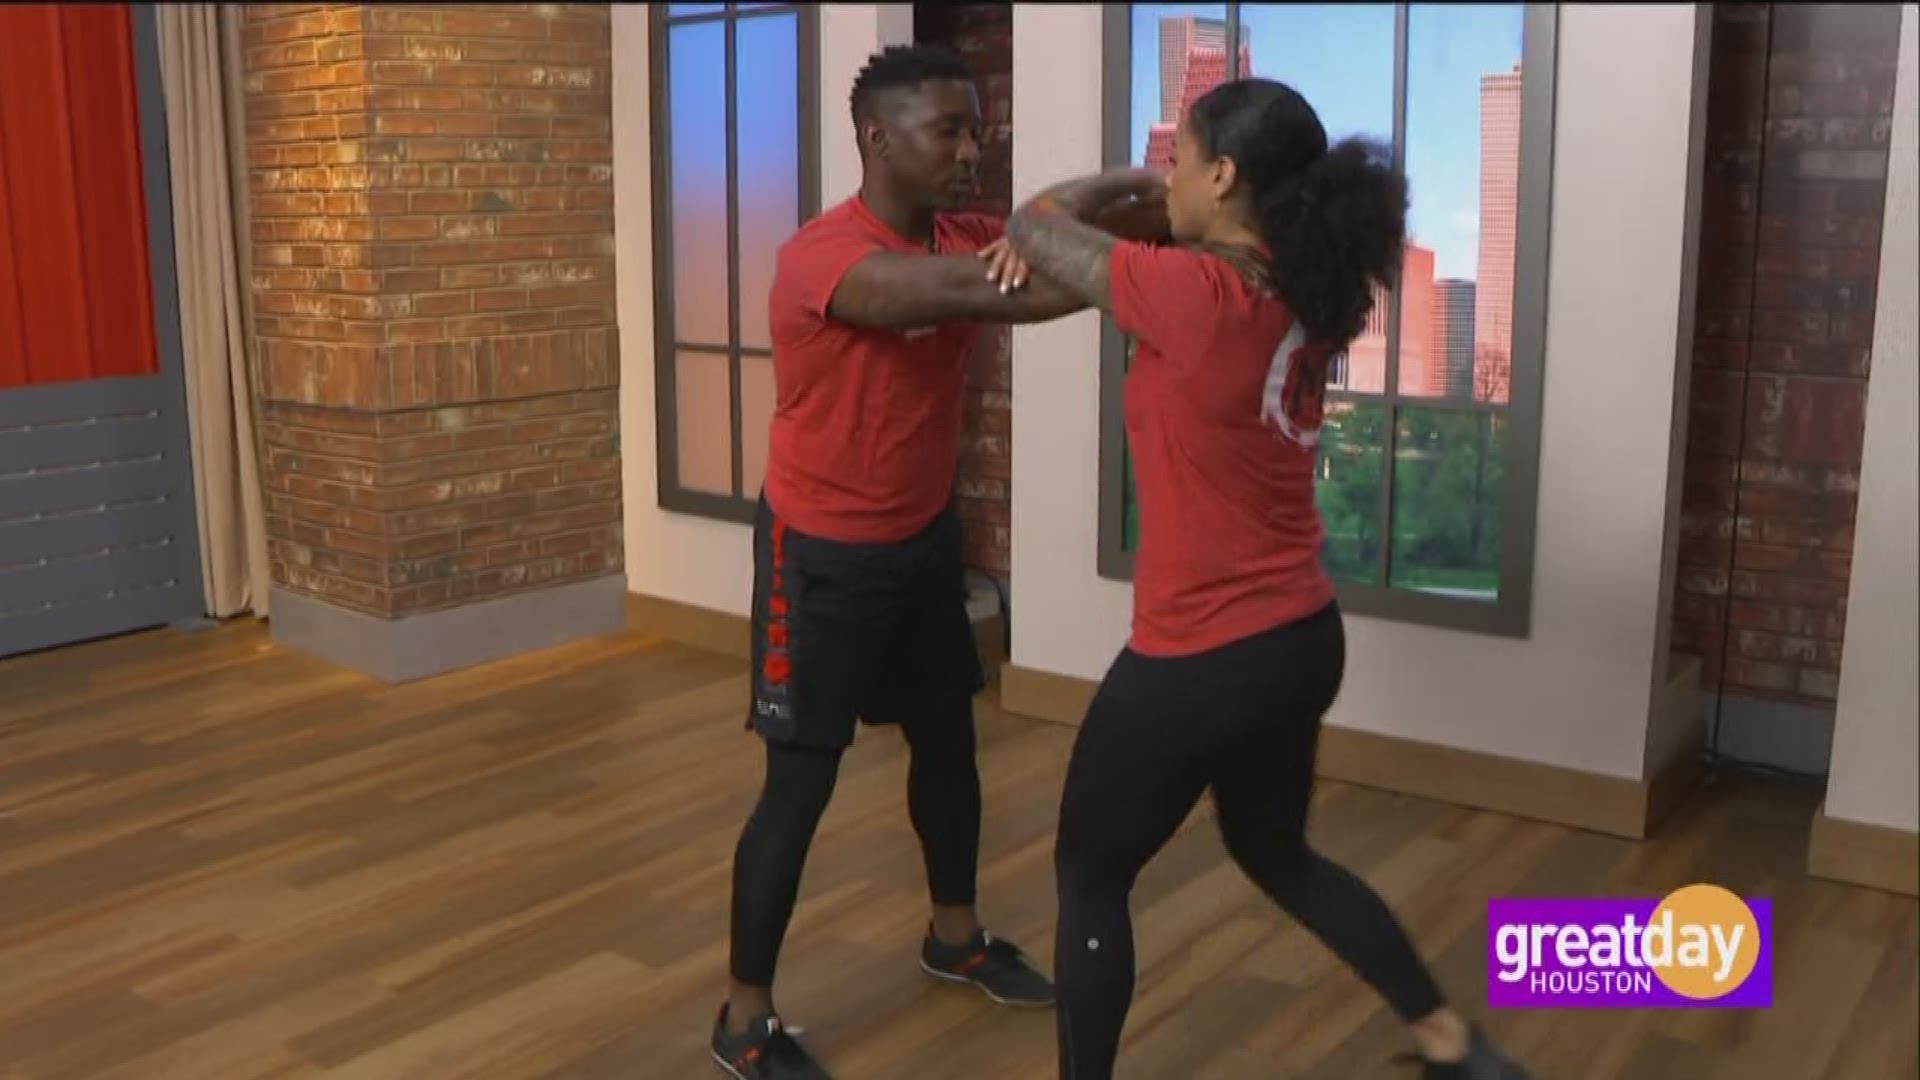 Khalil Johns, MBody Martial Arts and Fitness Founder, stops in with simple tips on how you can defend yourself in case of an emergency.